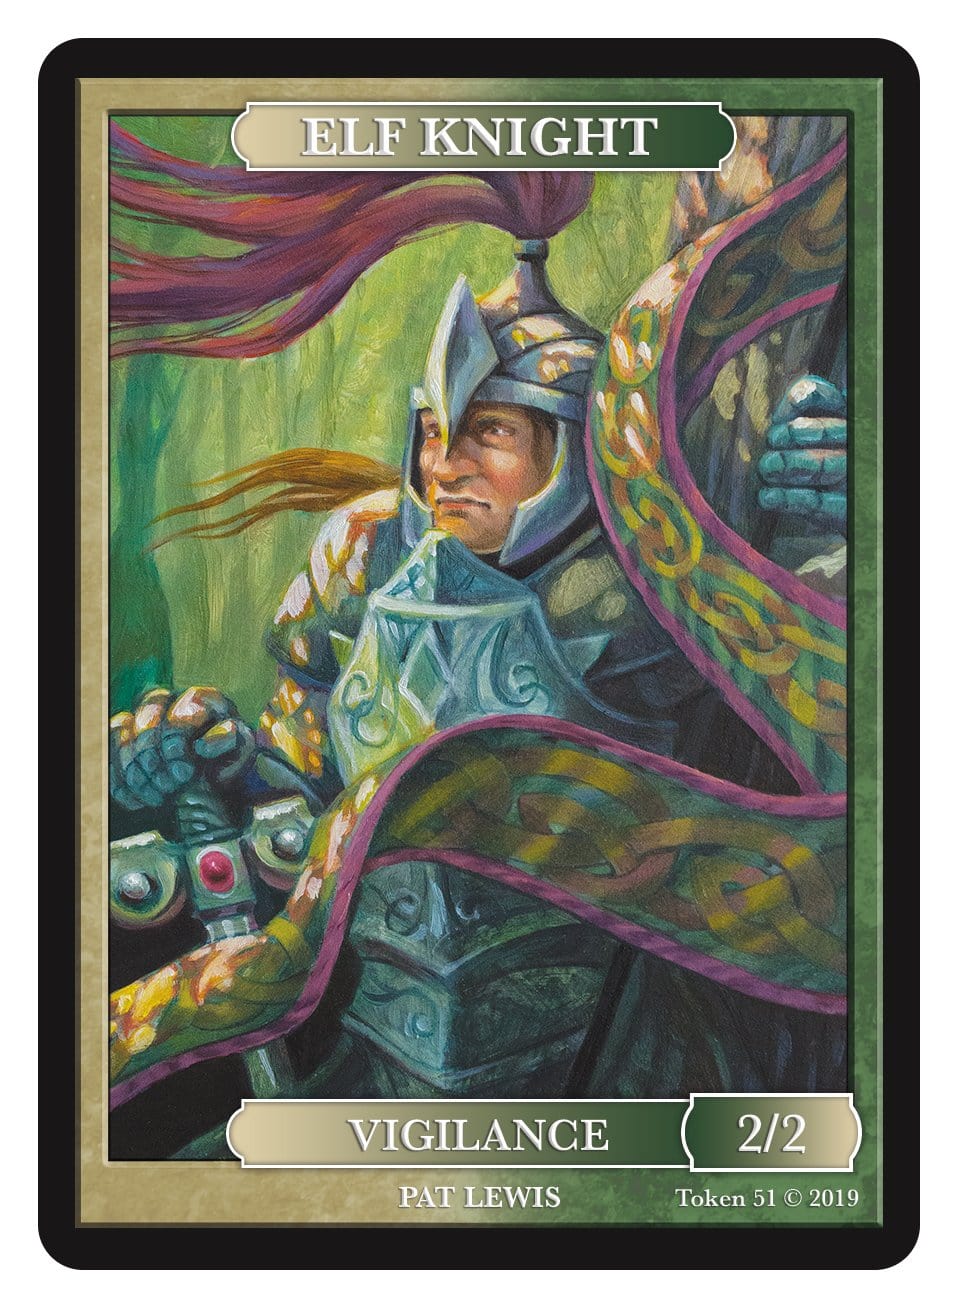 Elf Knight Token (2/2 - Vigilance) by Pat Lewis - Token - Original Magic Art - Accessories for Magic the Gathering and other card games